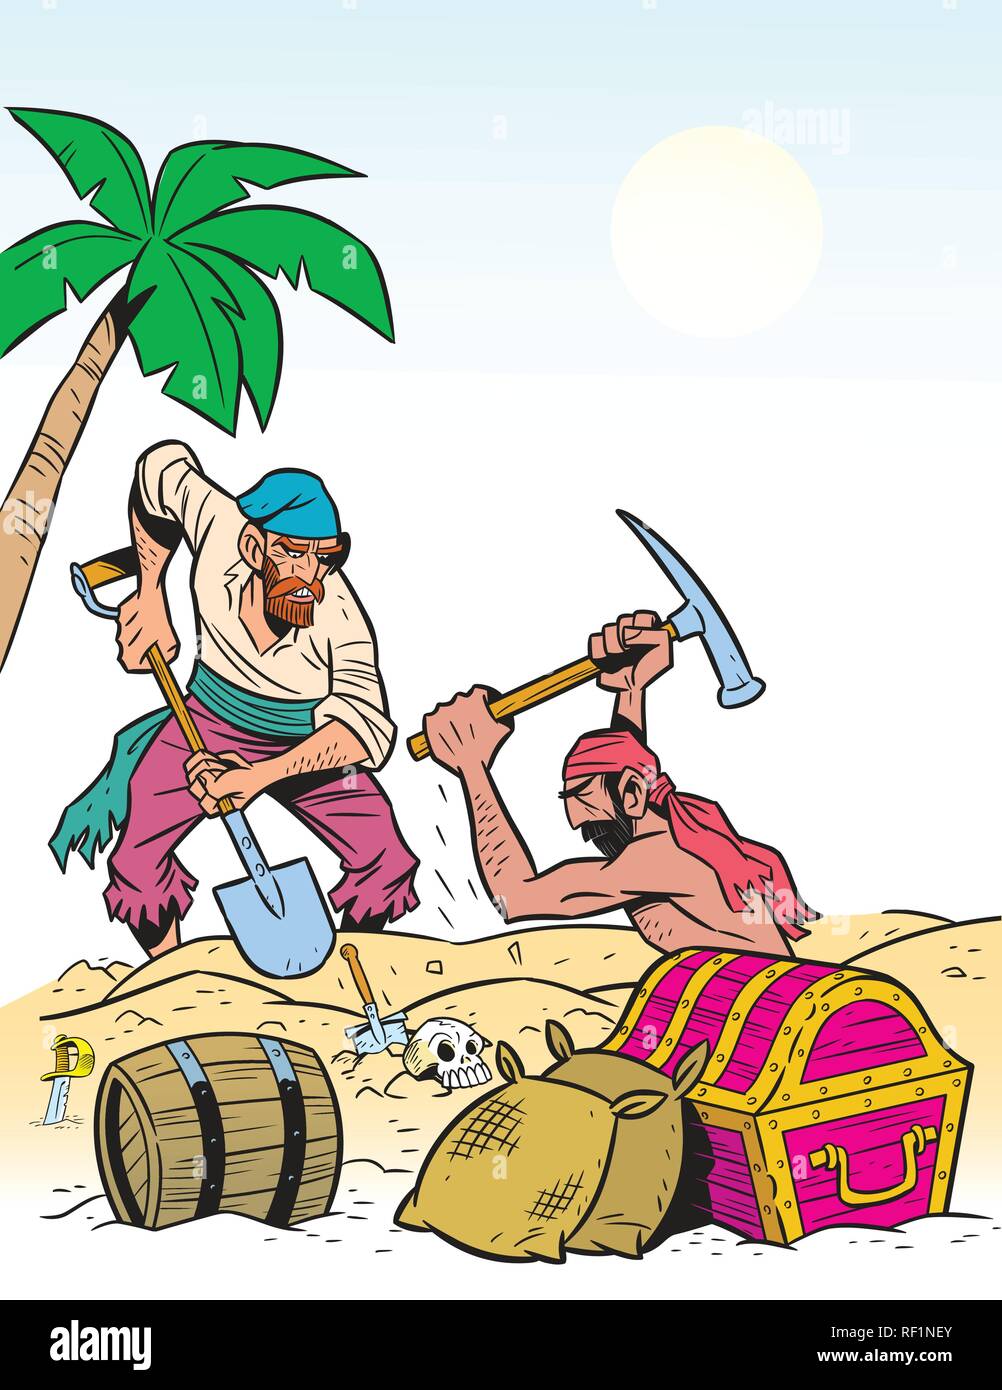 two-men-pirates-found-on-the-banks-of-the-treasure-they-dig-up-the